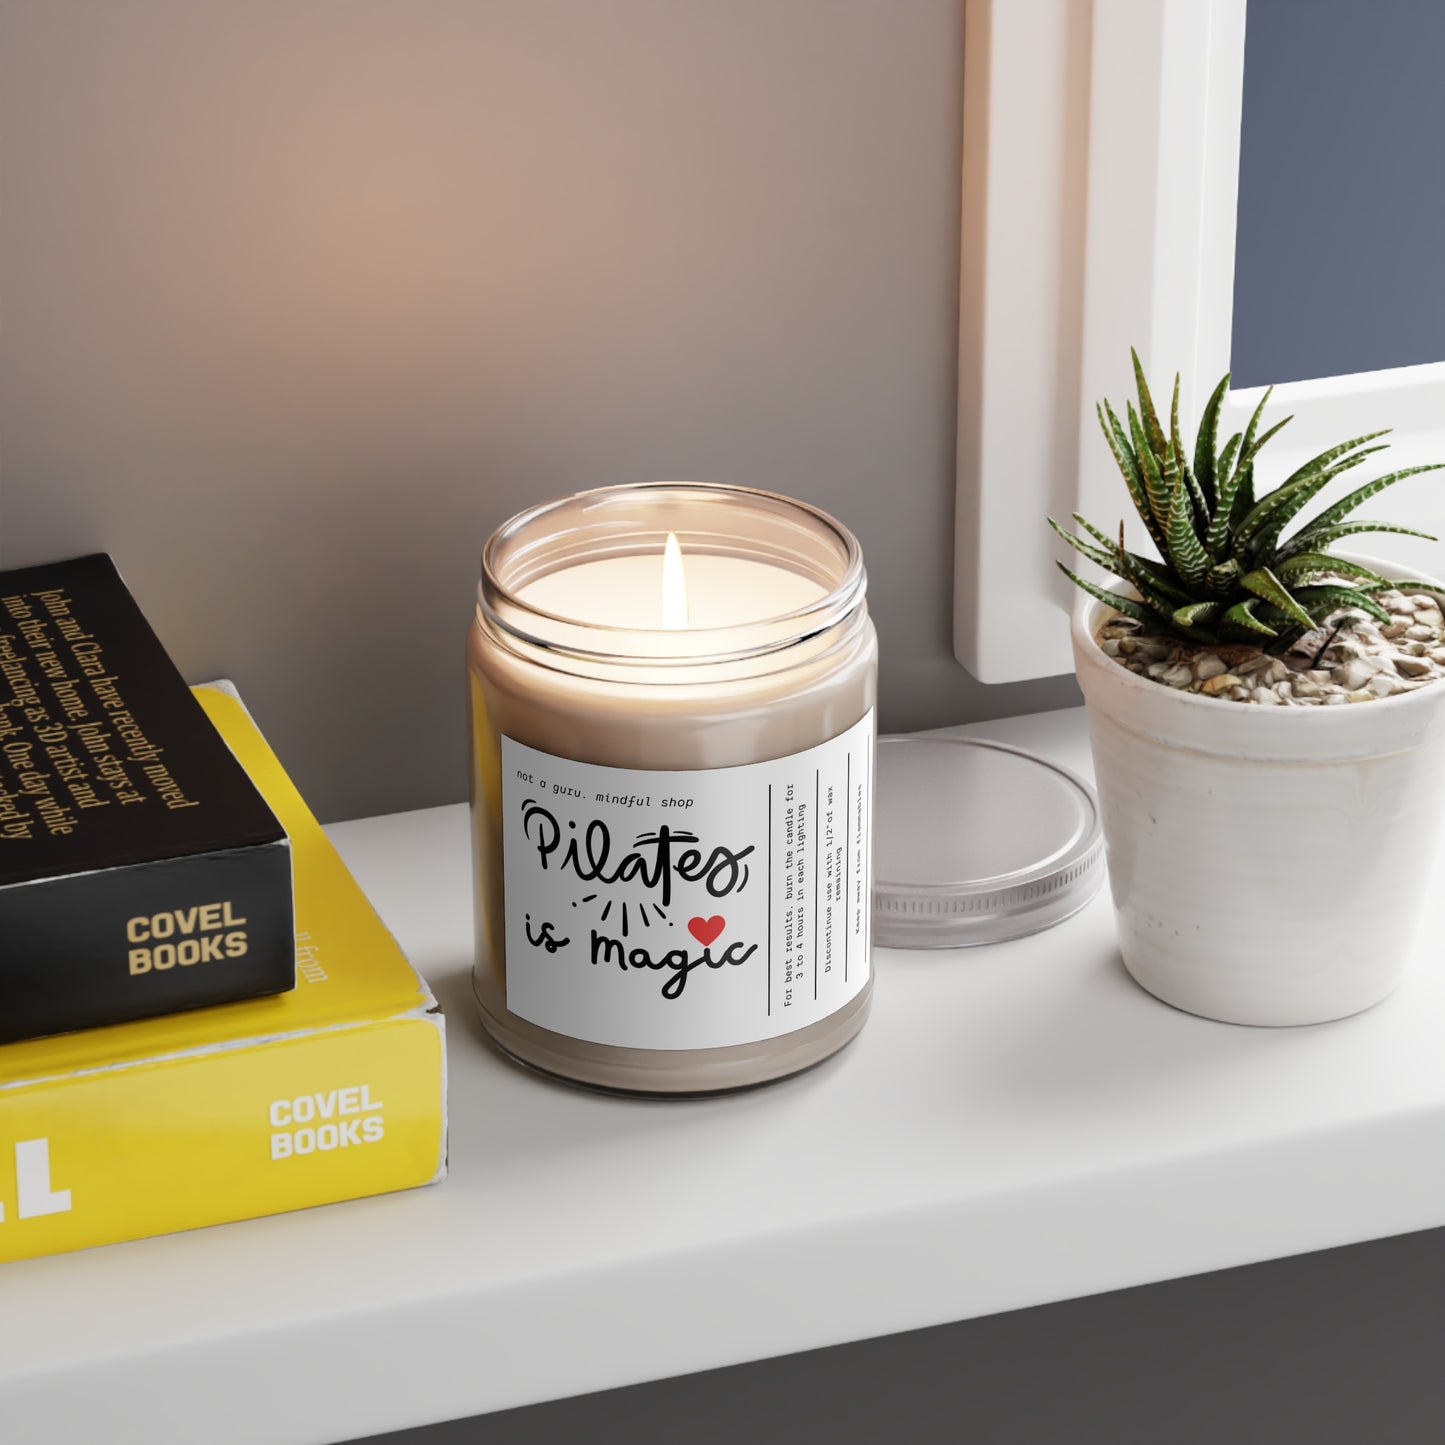 Pilates is Magic Scented Candles